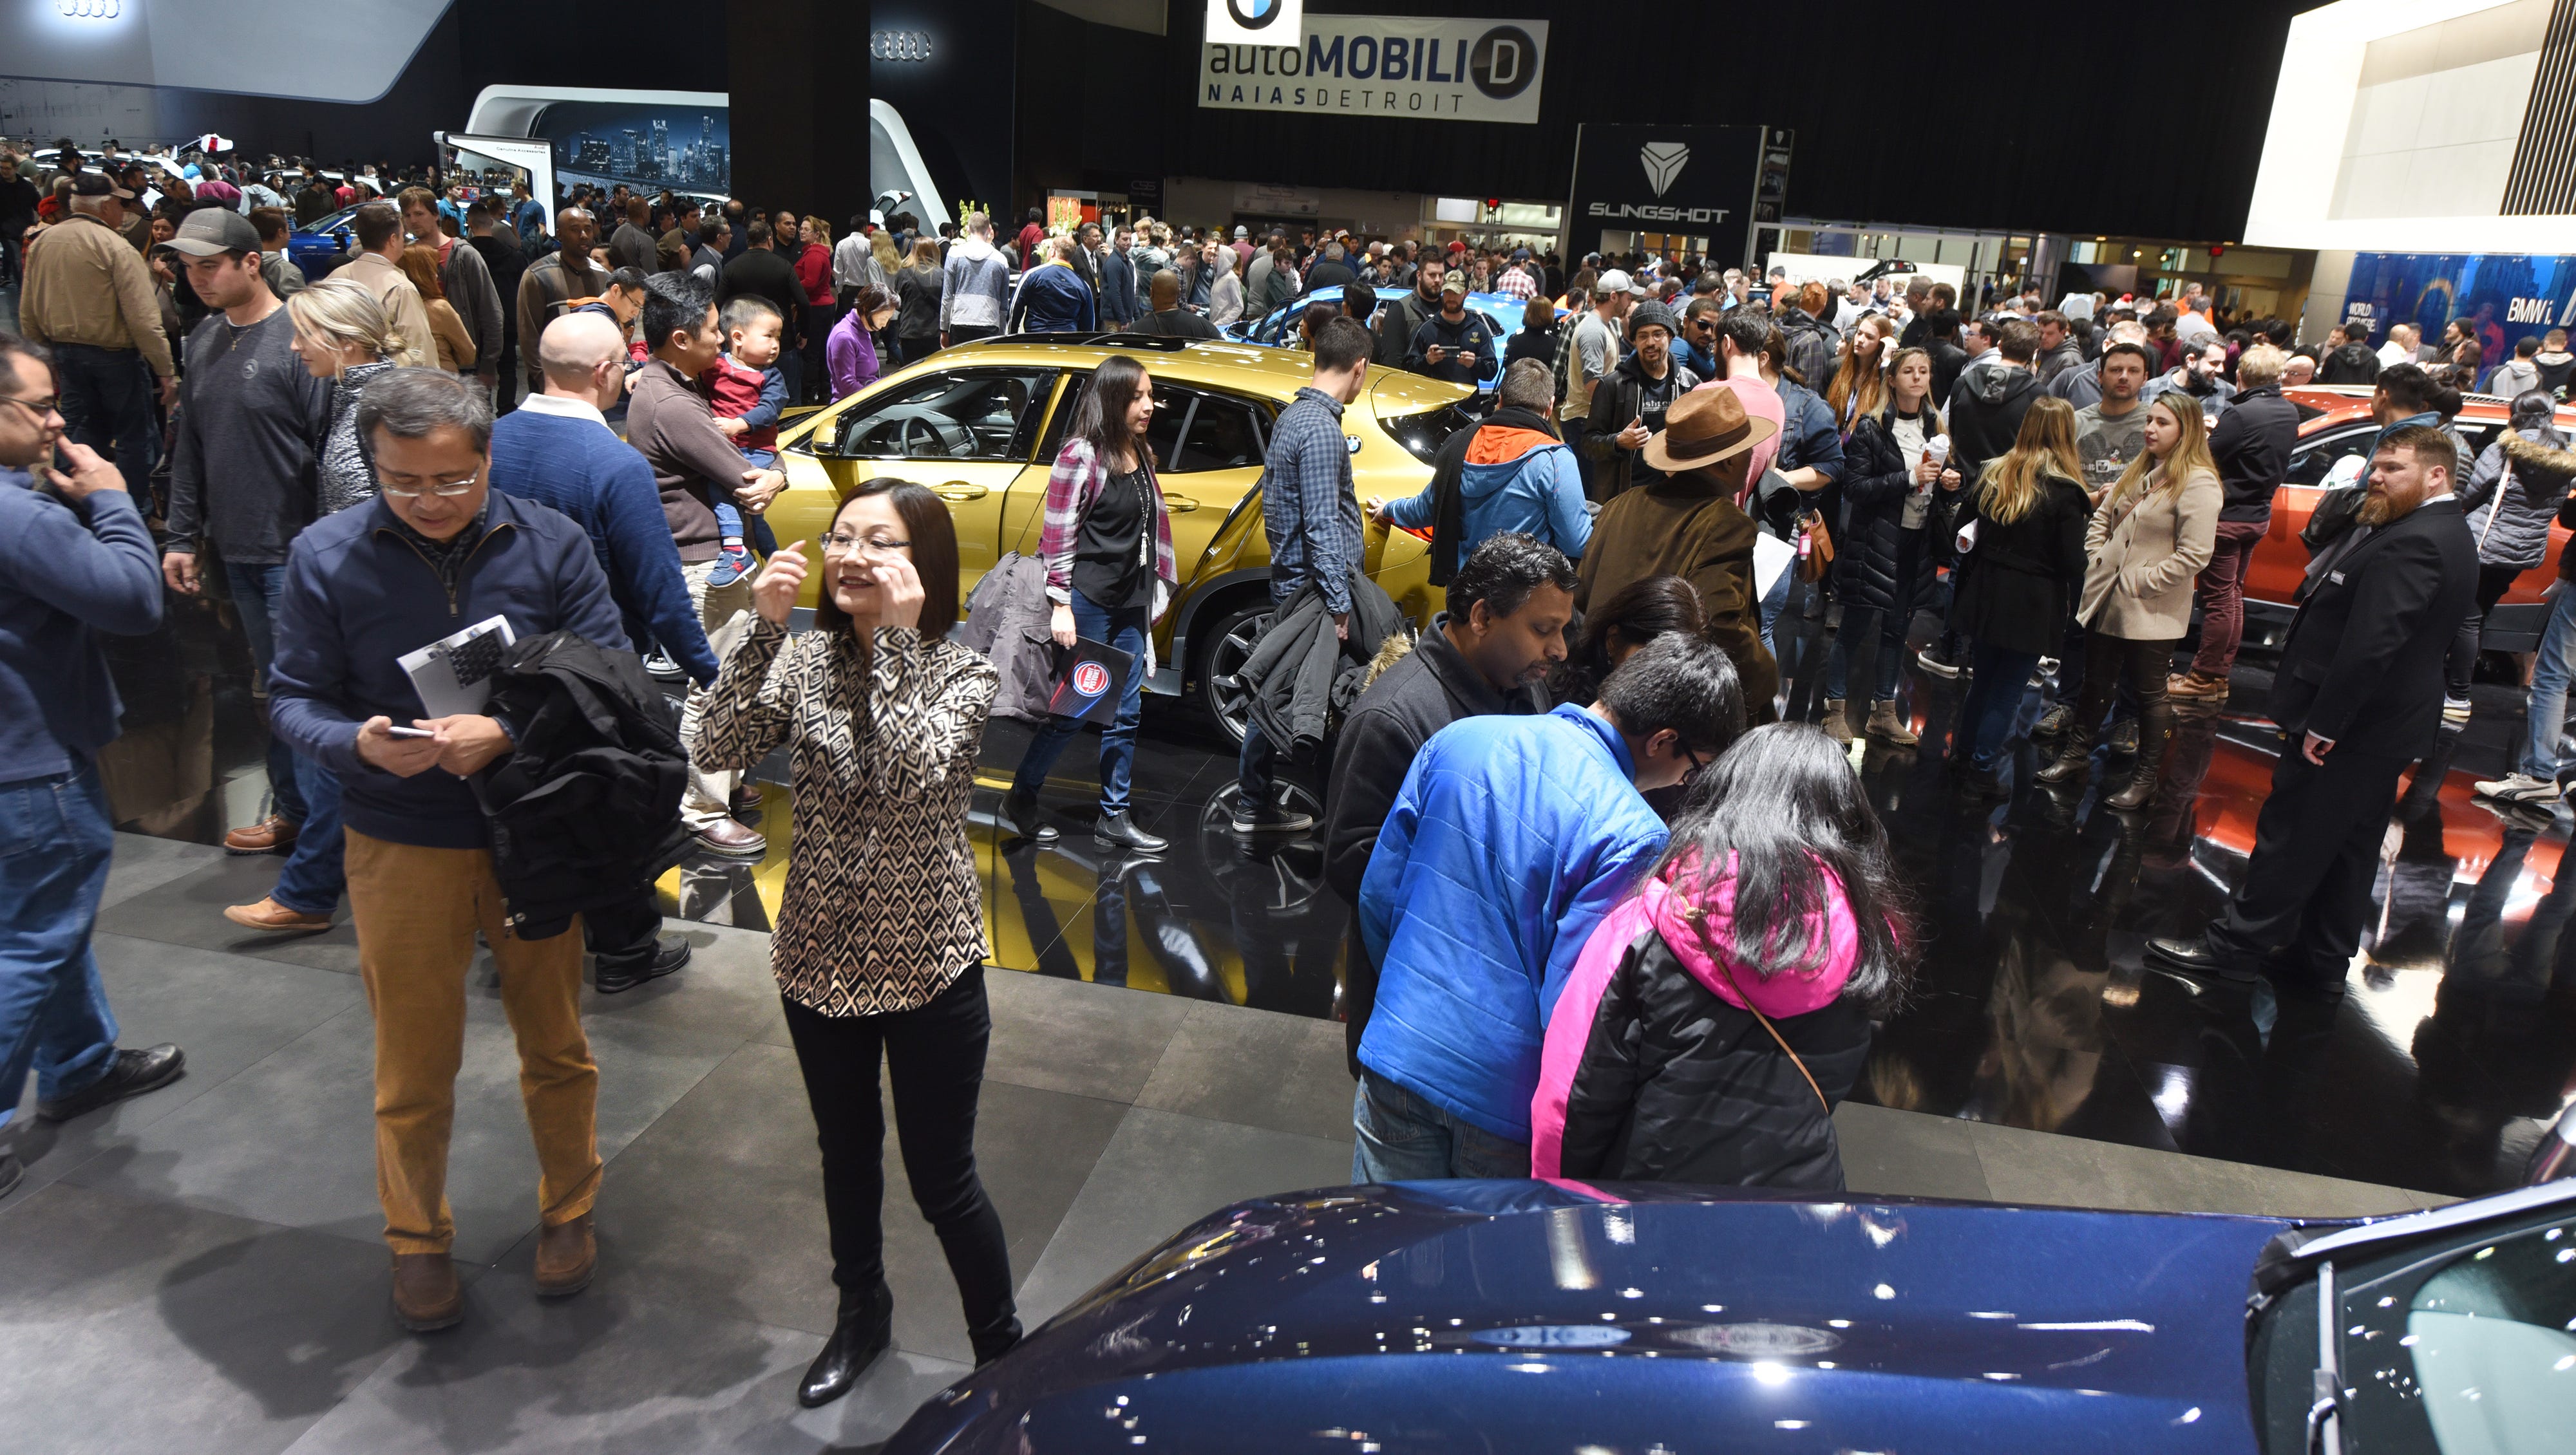 Thousands of people fill Cobo Center on Saturday January 20, 2018 at the BMW display for the first public day for the North American International Auto Show